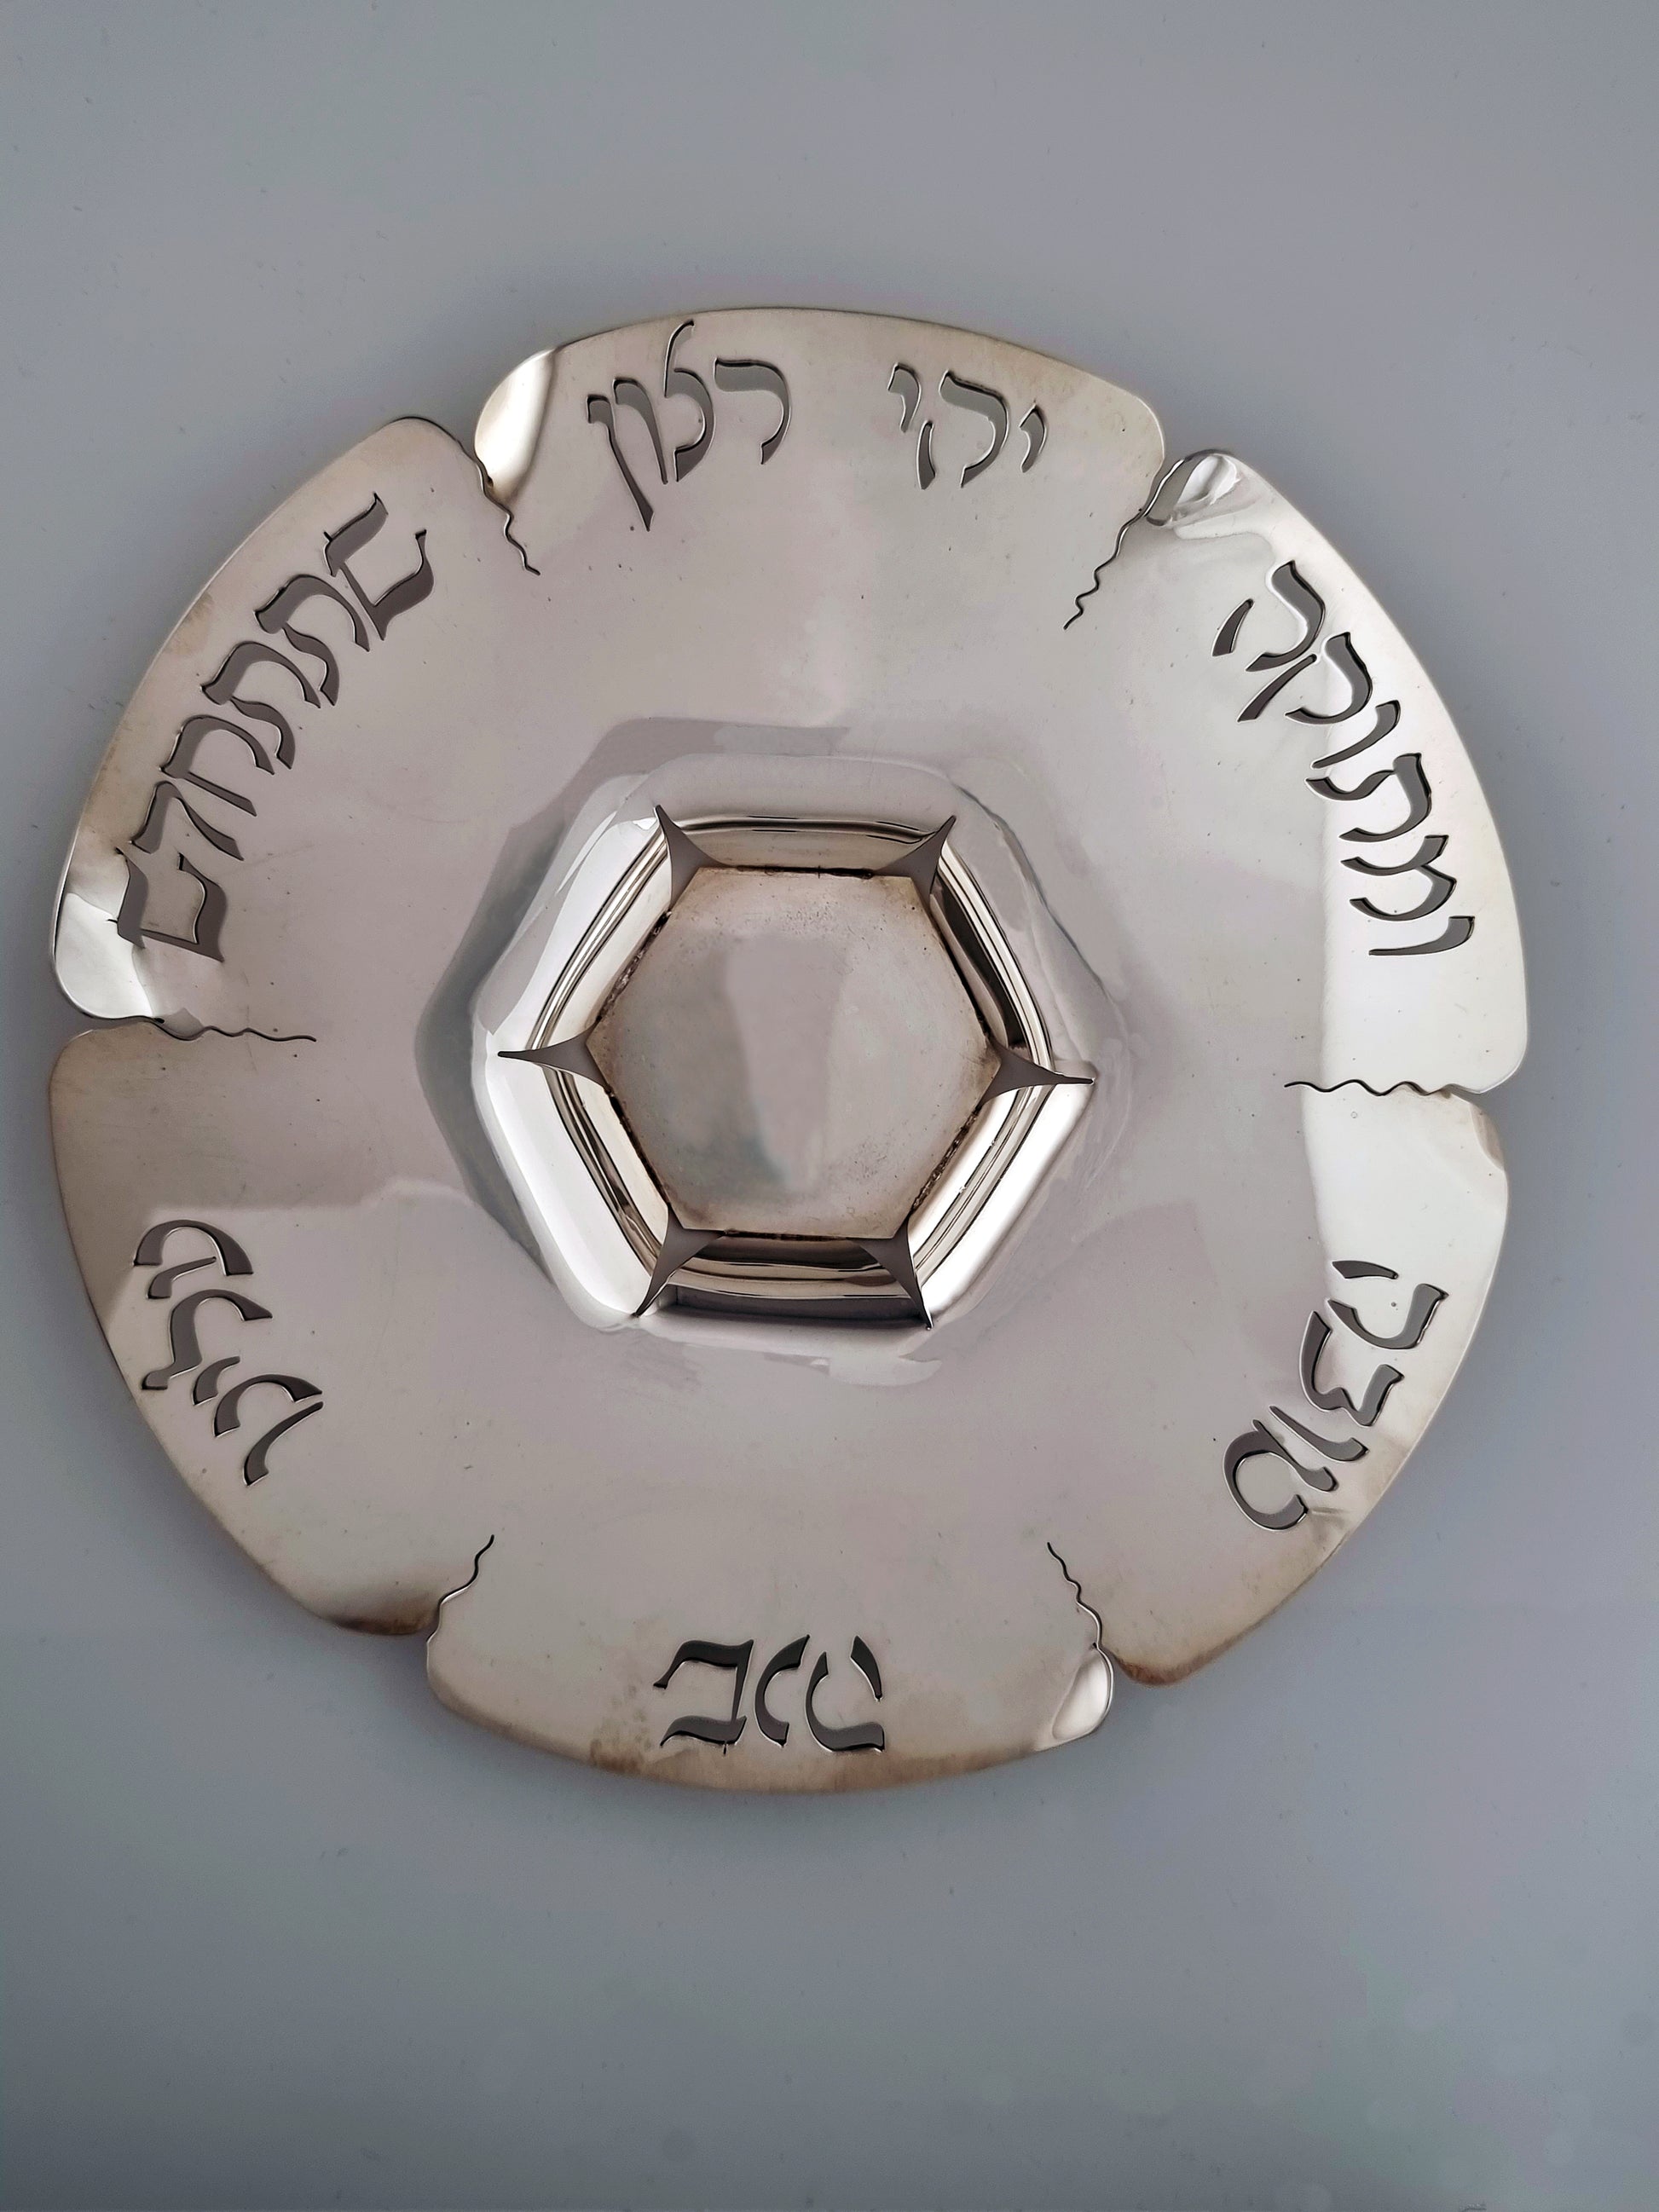 Top view of Abigail Honey Dish. This unique design has six leaves, each leaf partly separated in two dimensions.